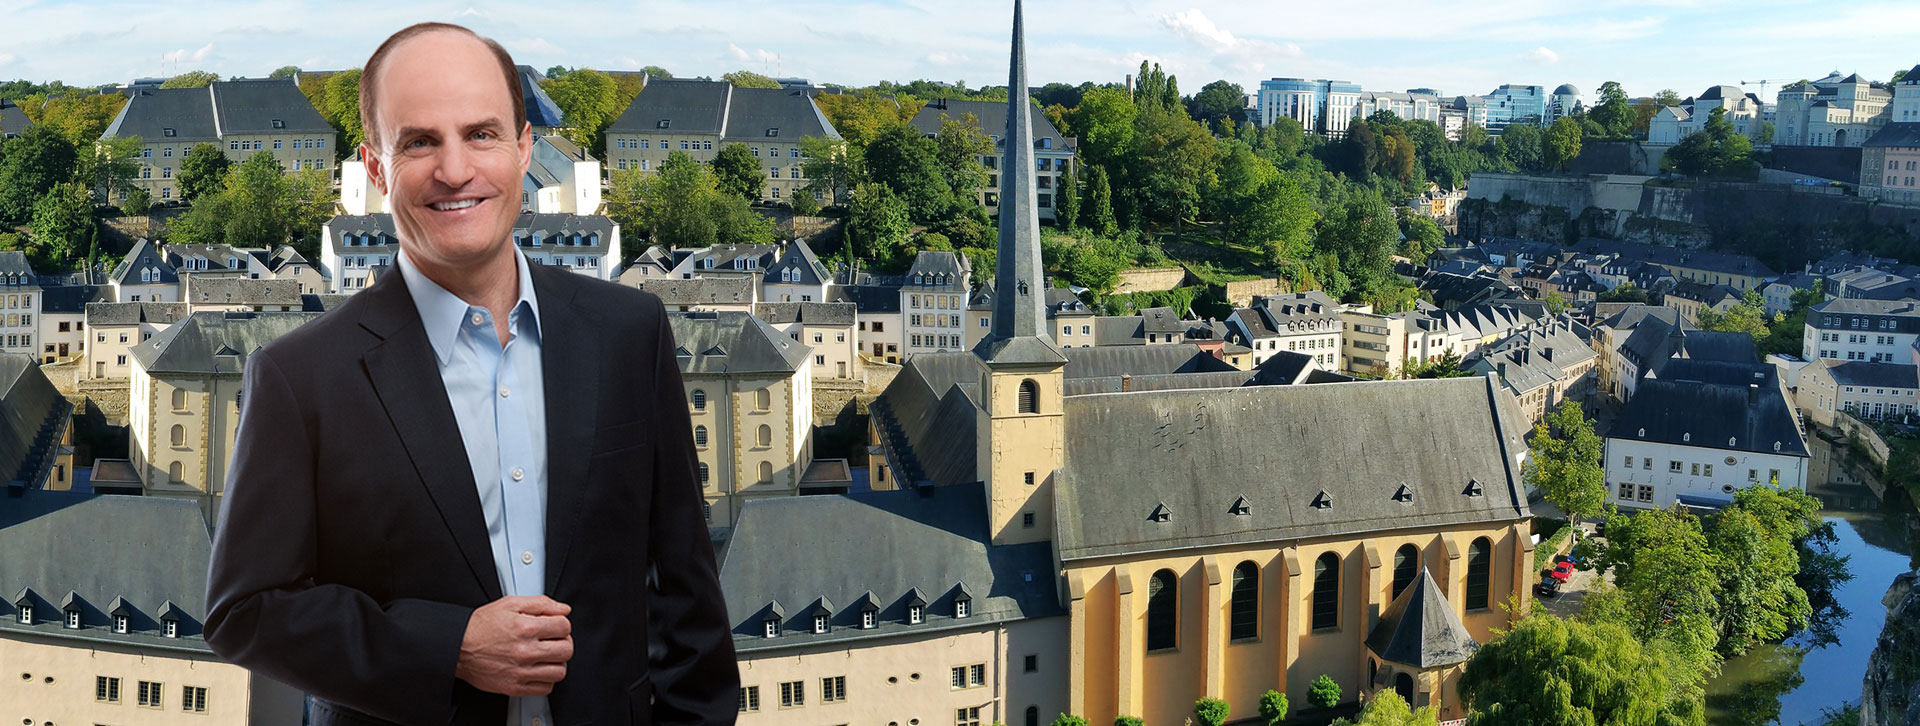 Motivational Service Excellence Keynote Speaker in Luxembourg City, Luxembourg